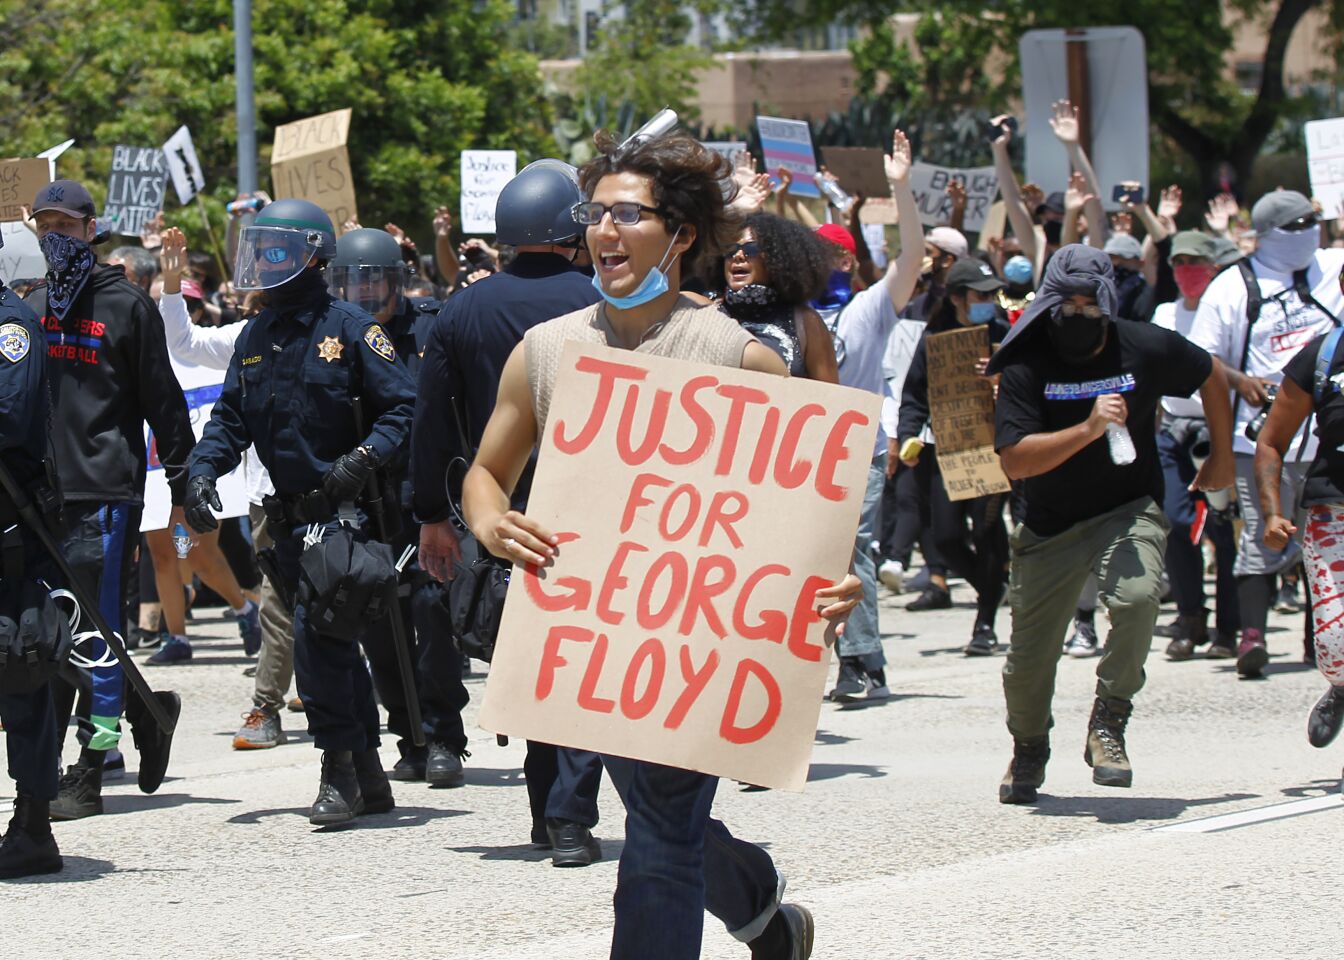 A group protesting the death of George Floyd march on I-5 in downtown San Diego on May 31, 2020.